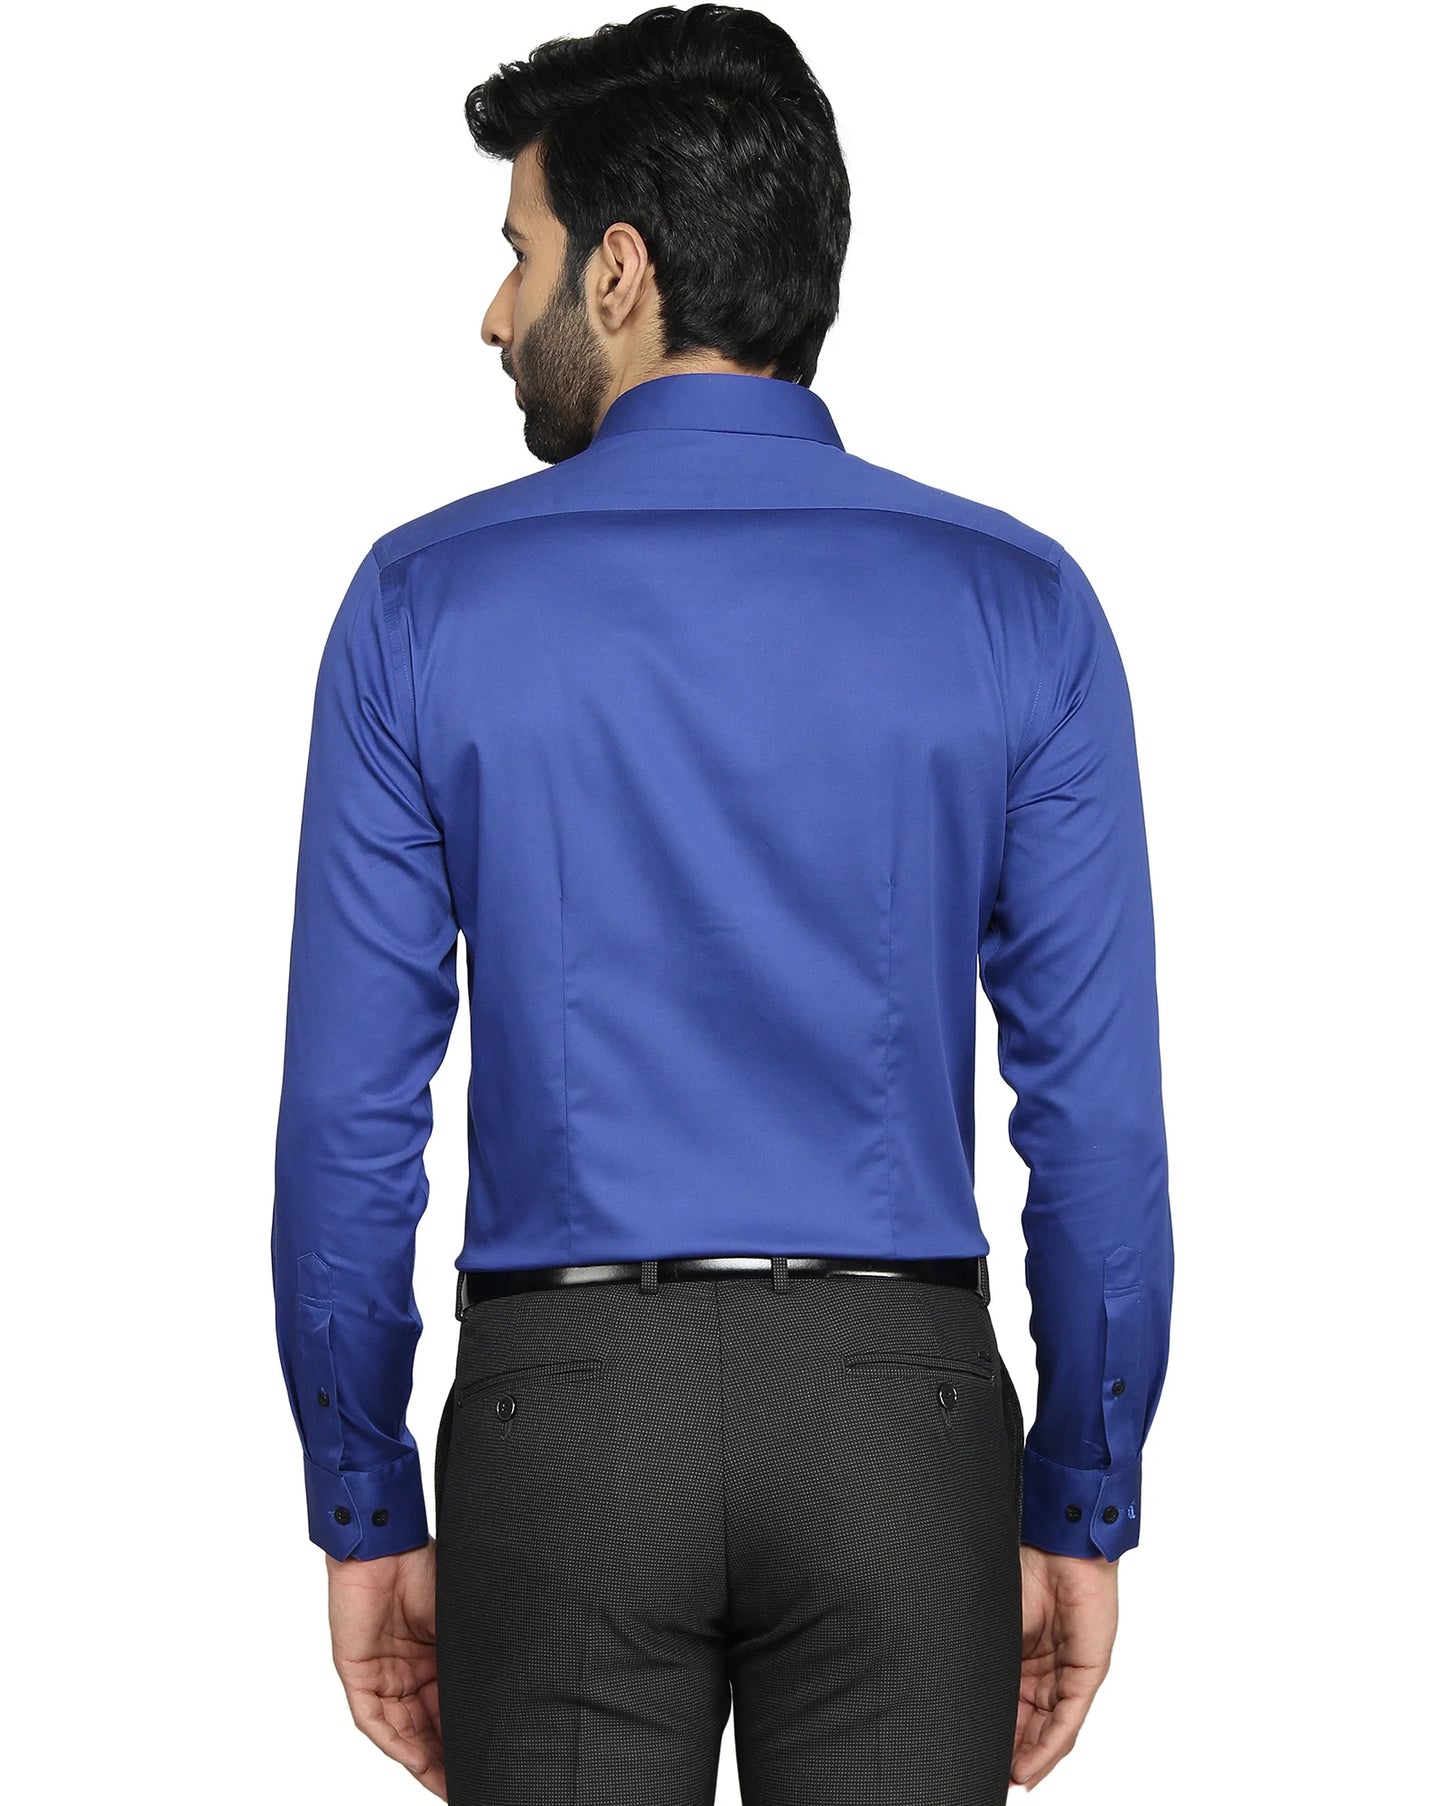 Solid formal shirt in royal blue